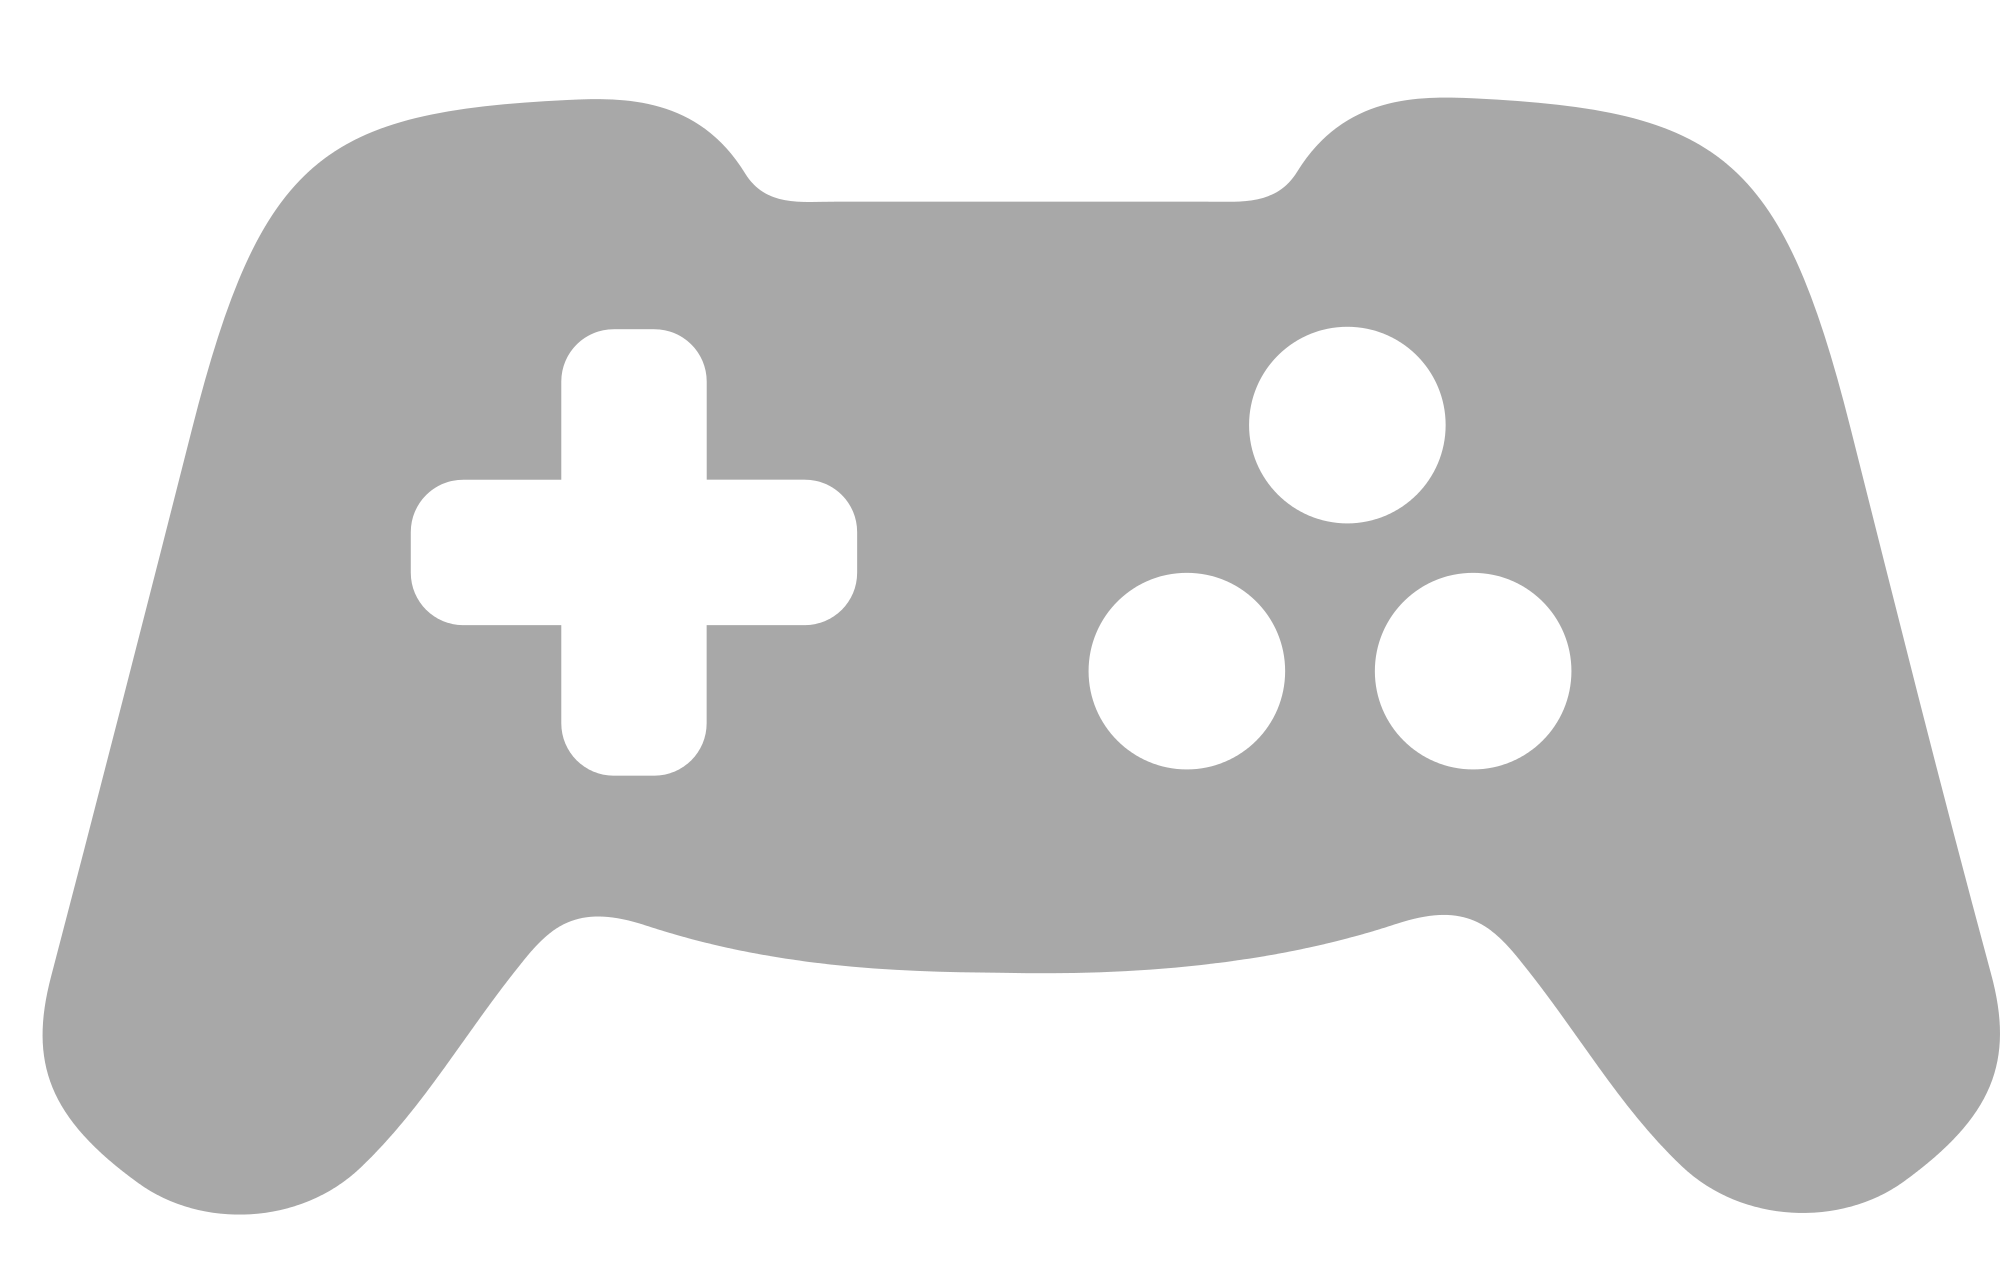 Video Game svg #10, Download drawings